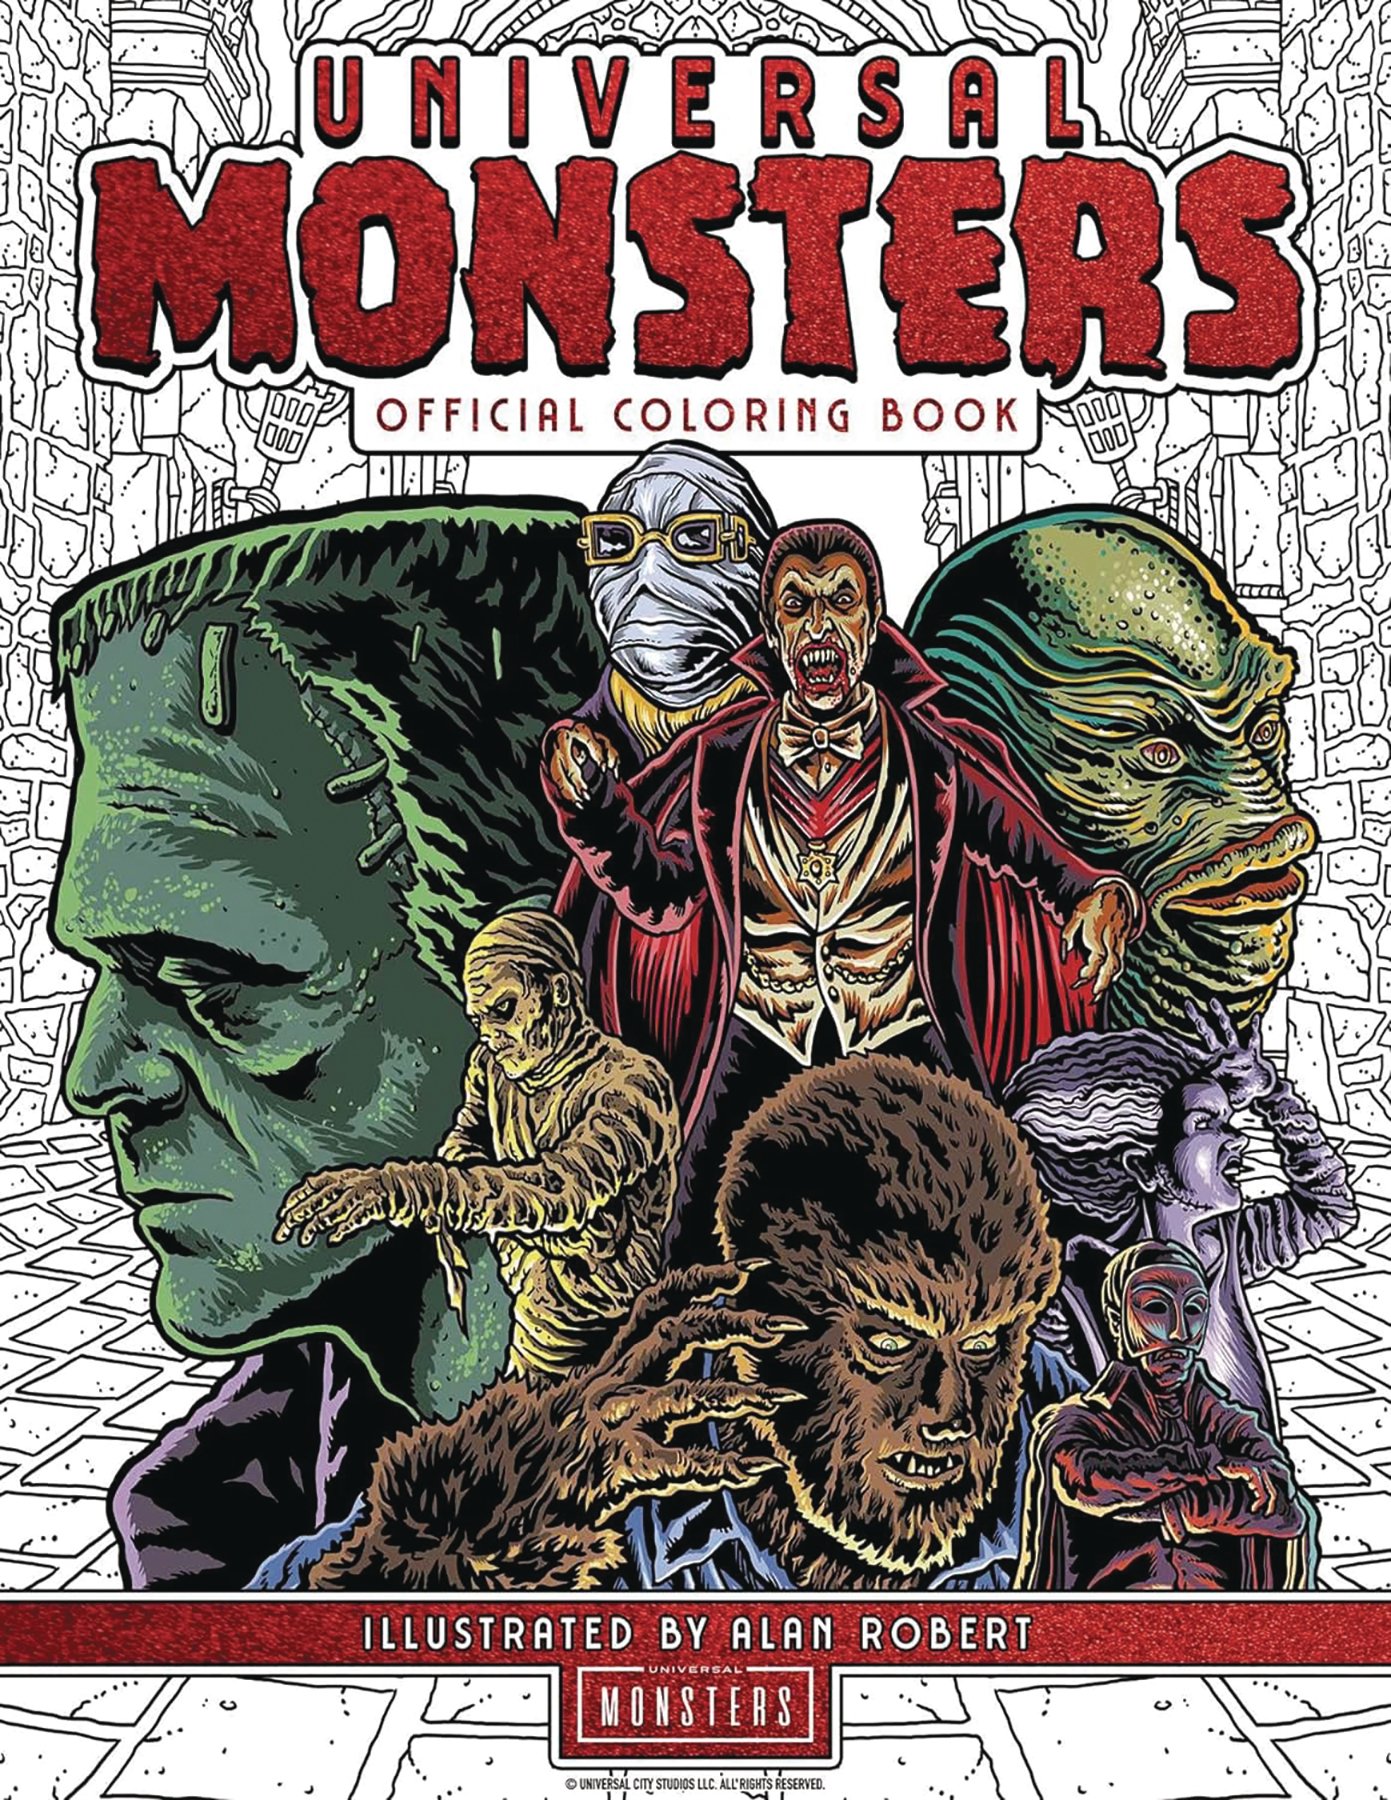 Universal Monsters Official Coloring Book Soft Cover